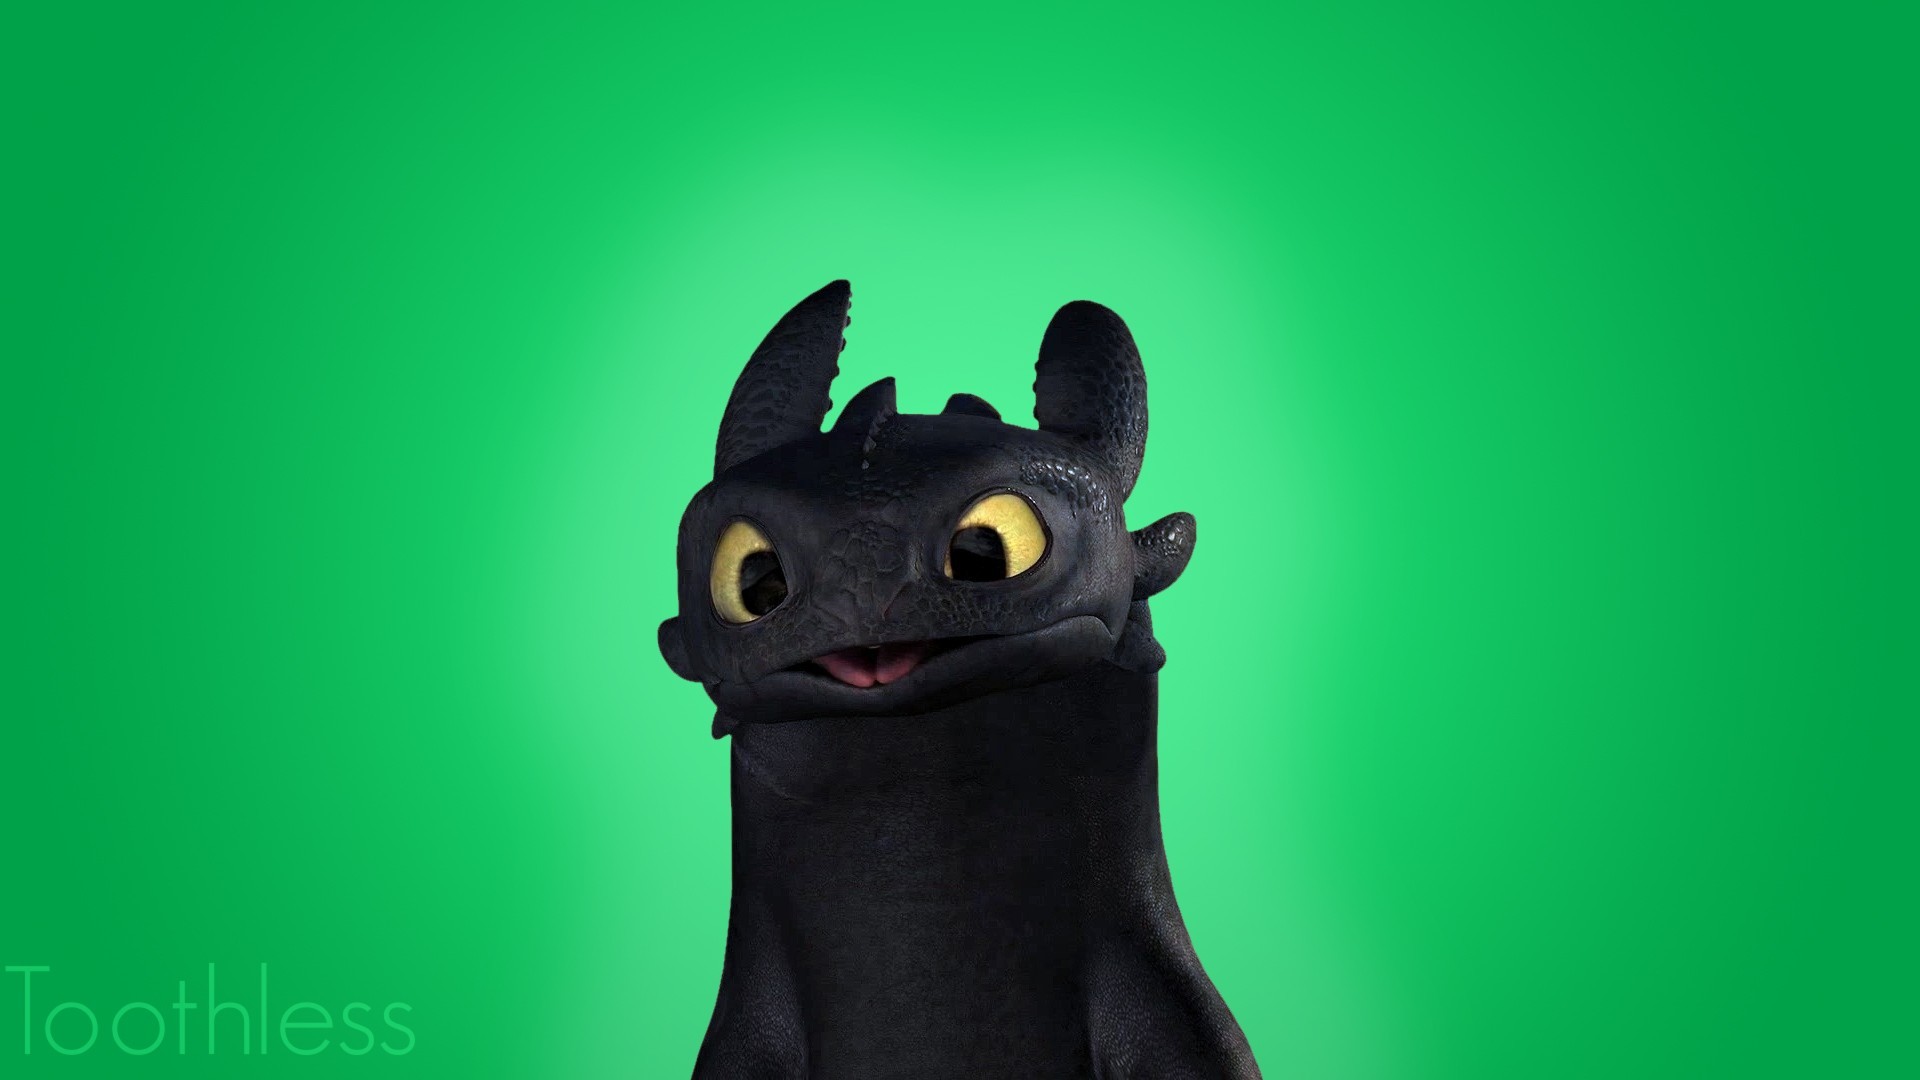 Toothless How To Train Your Dragon How To Train Your Dragon 2 Wallpapers Hd Desktop And Mobile Backgrounds 1920x1080